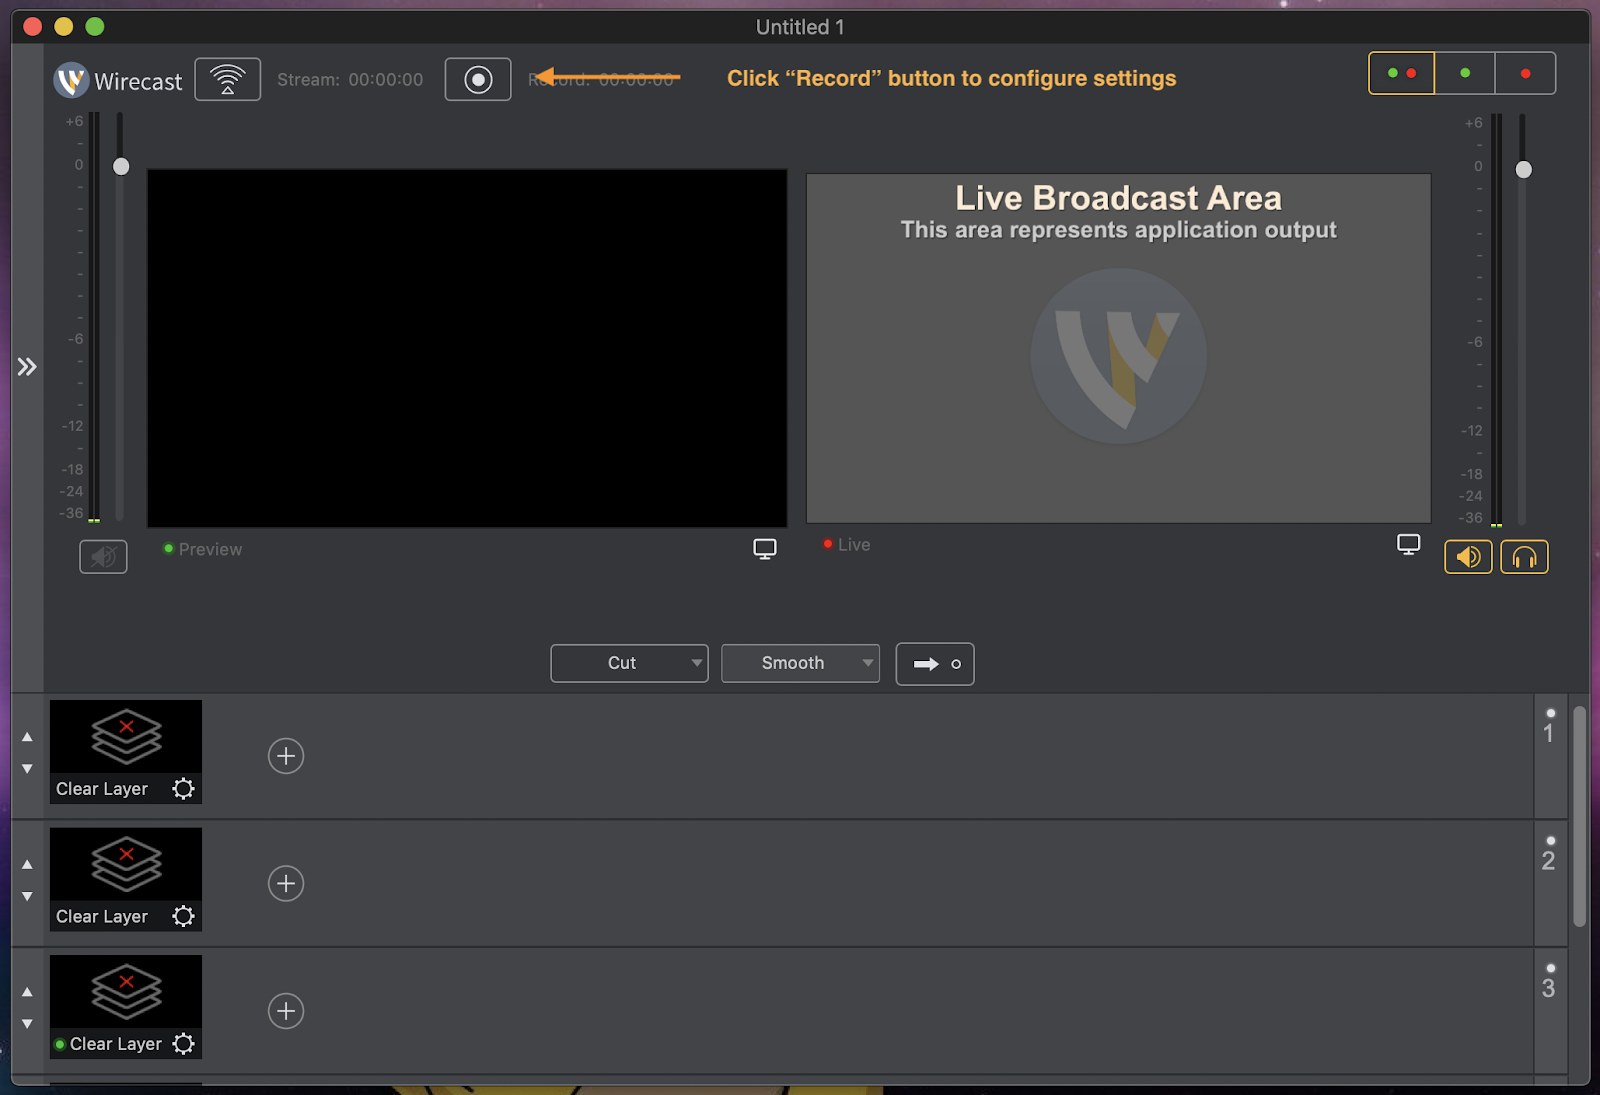 wirecast download full free